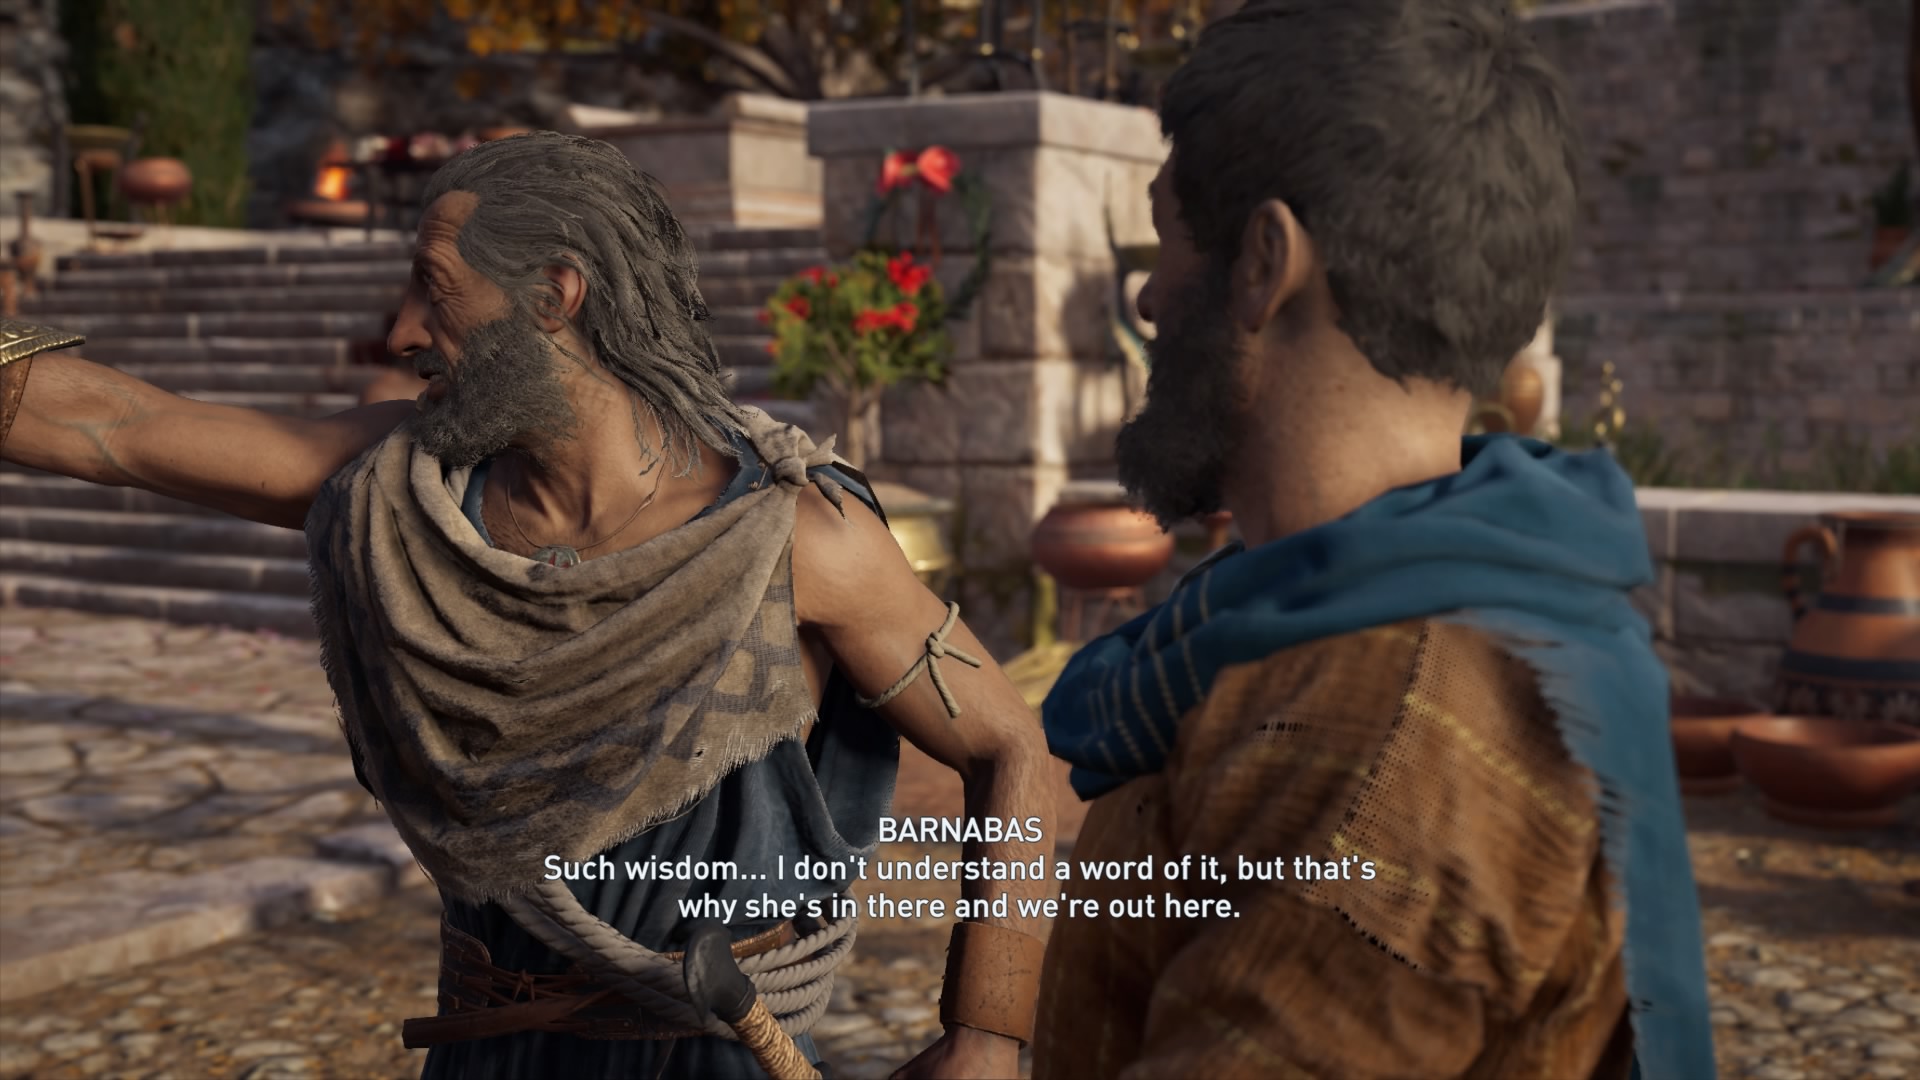 Assassin's Creed Odyssey' 1.07 Patch Notes: Increased Level Cap